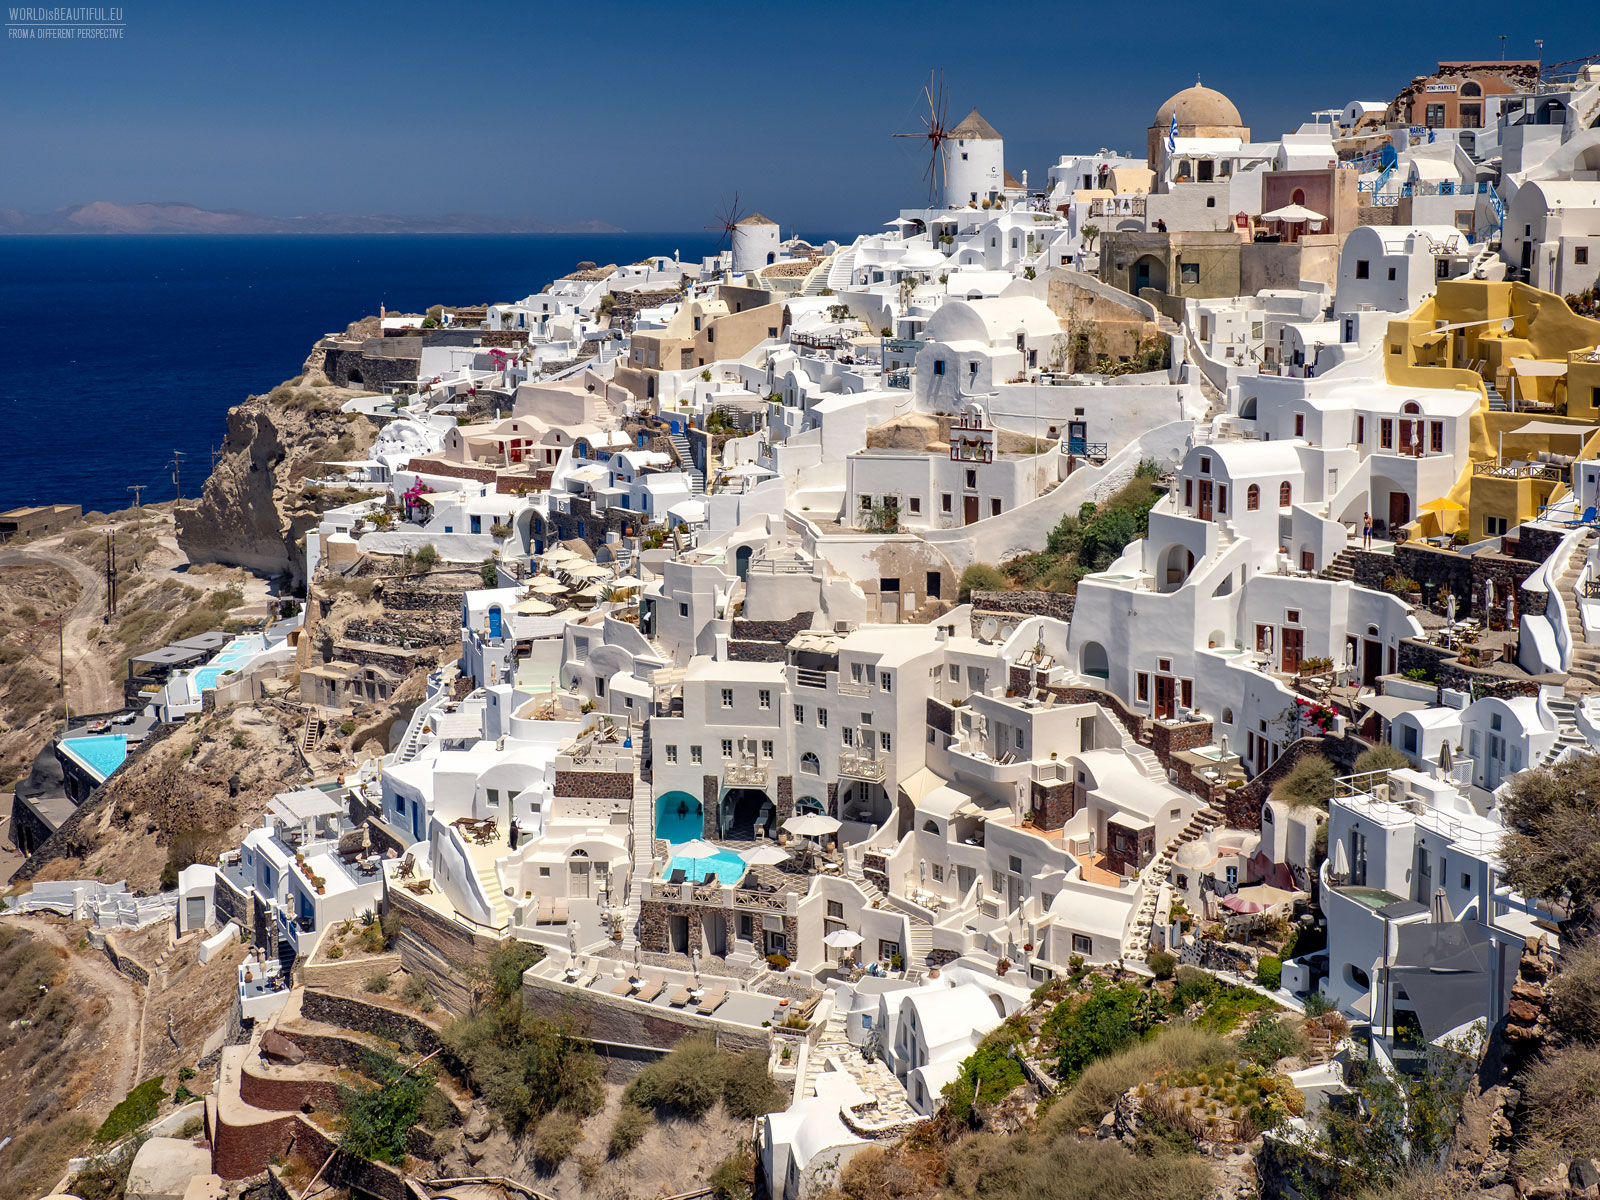 Postcard from Oia